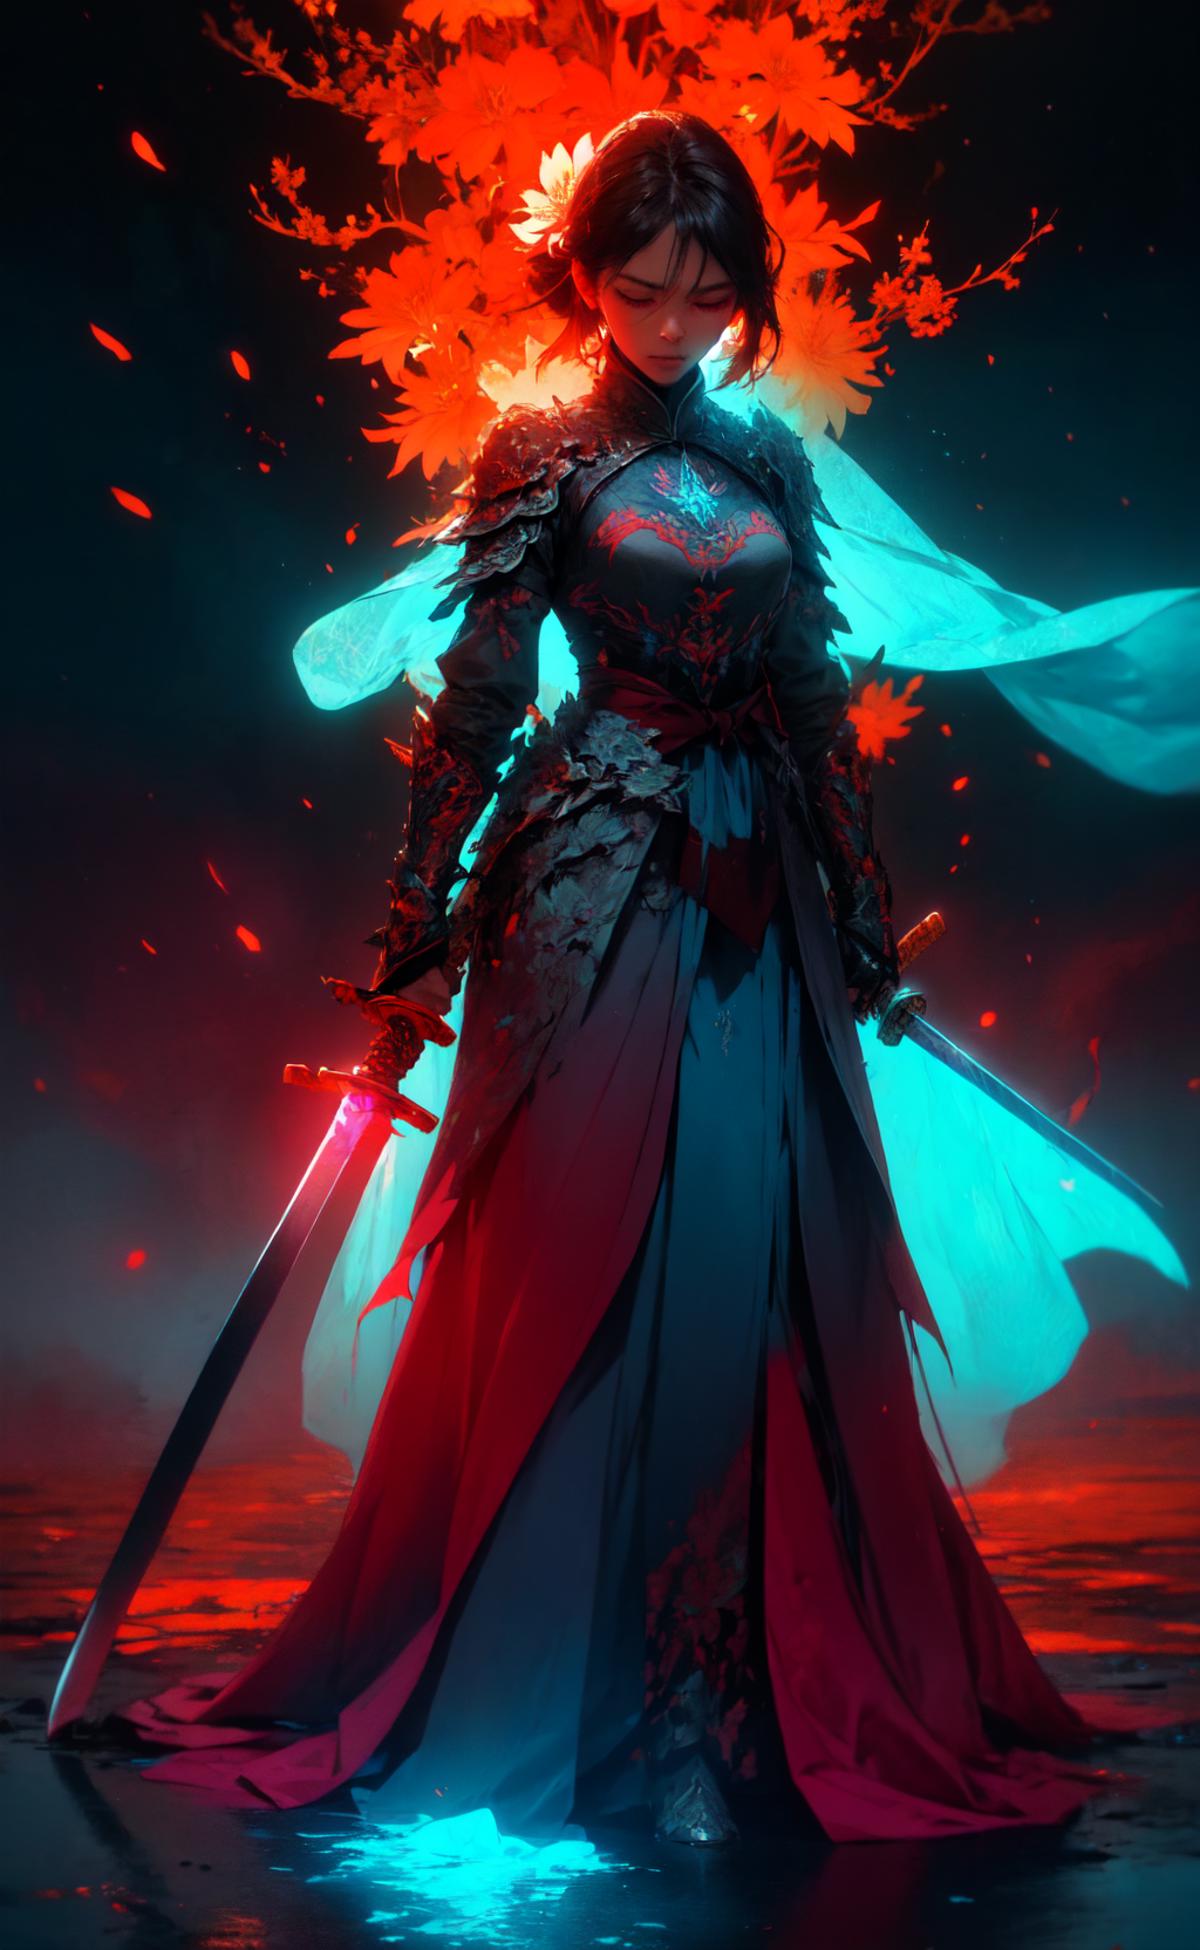 Fantasy Art of a Warrior Woman with Blue Dress and Swords